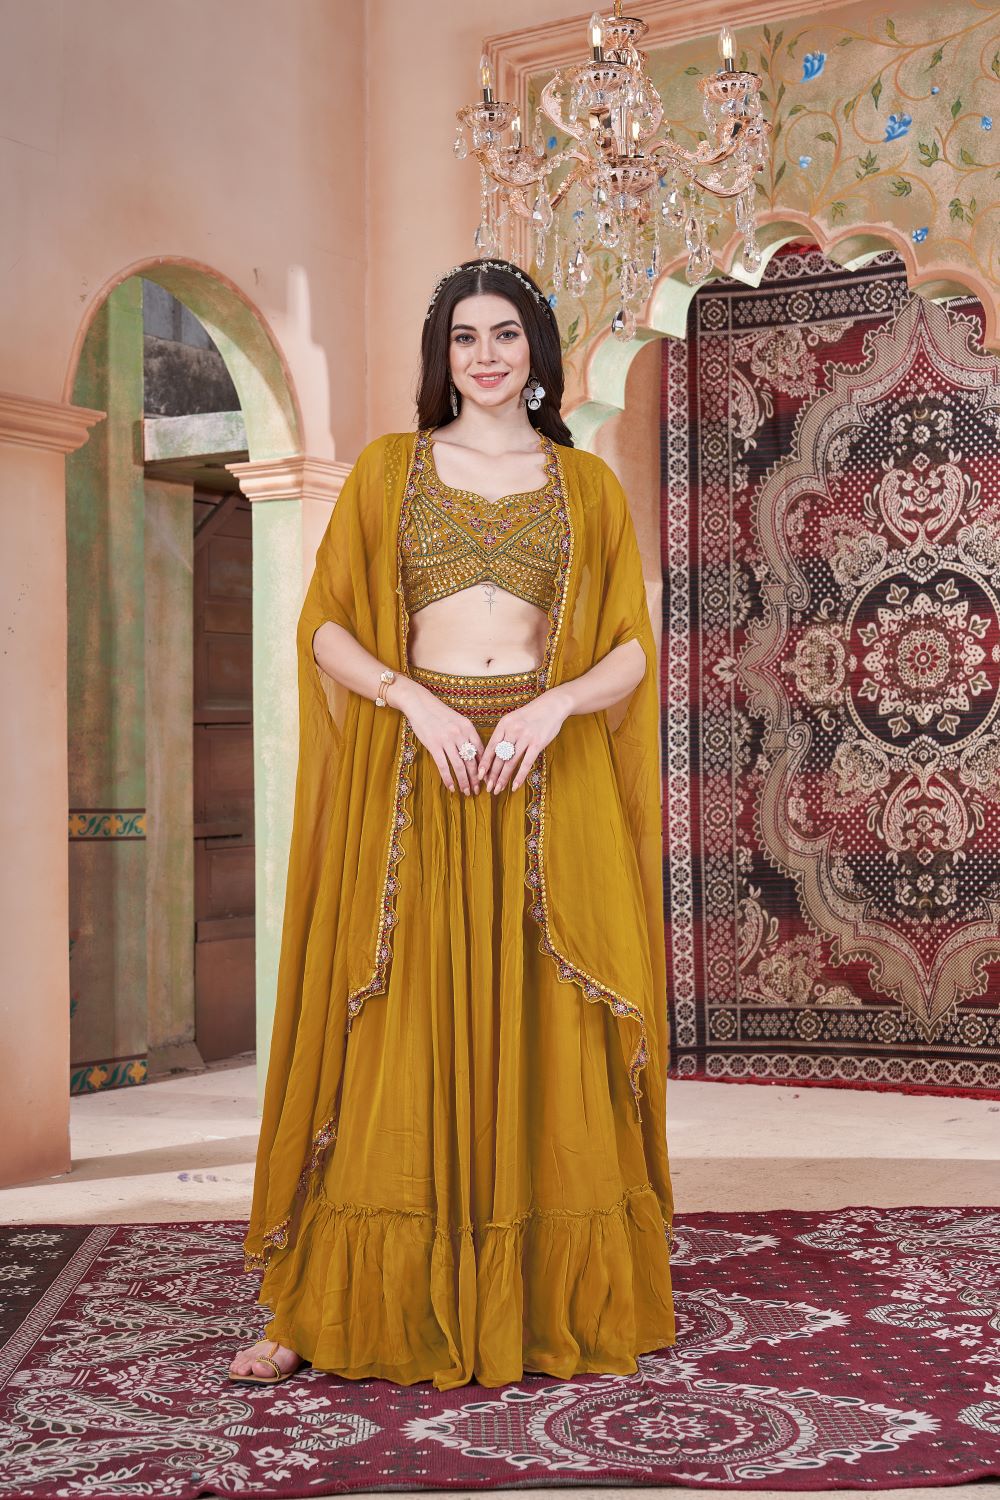 Golden Radiance: Handcrafted Mustard Indowestern Marvel for Your Special Day